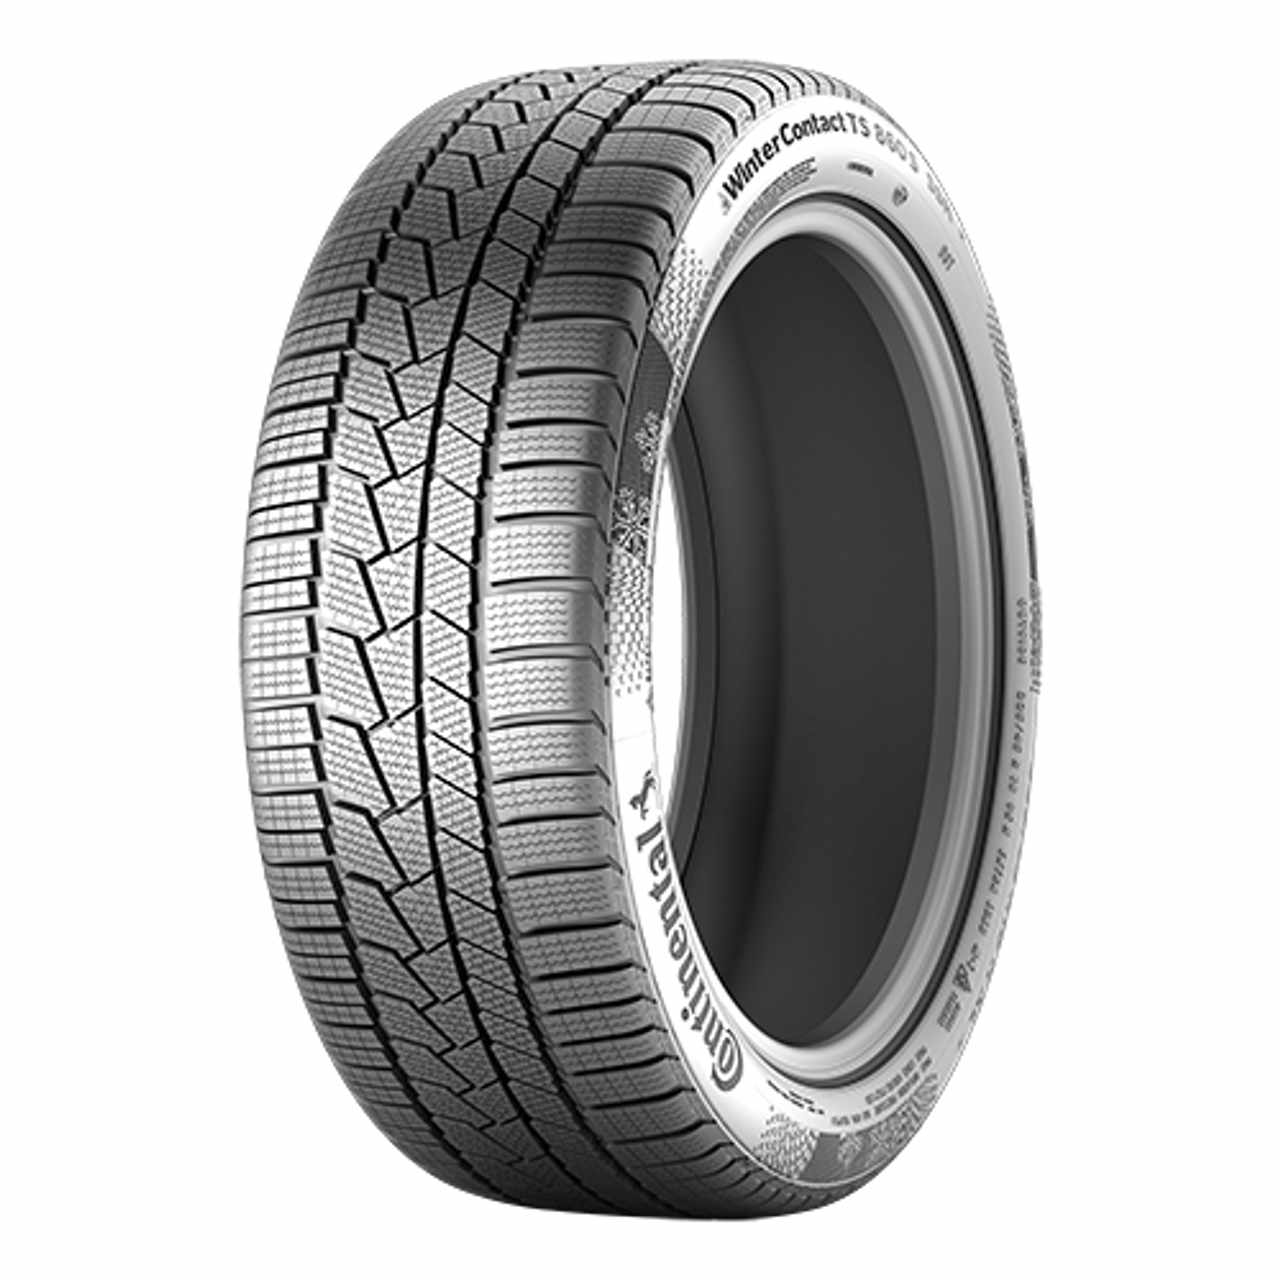 CONTINENTAL WINTERCONTACT TS 860 S (*) (EVc) SSR 265/50R19 110H BSW